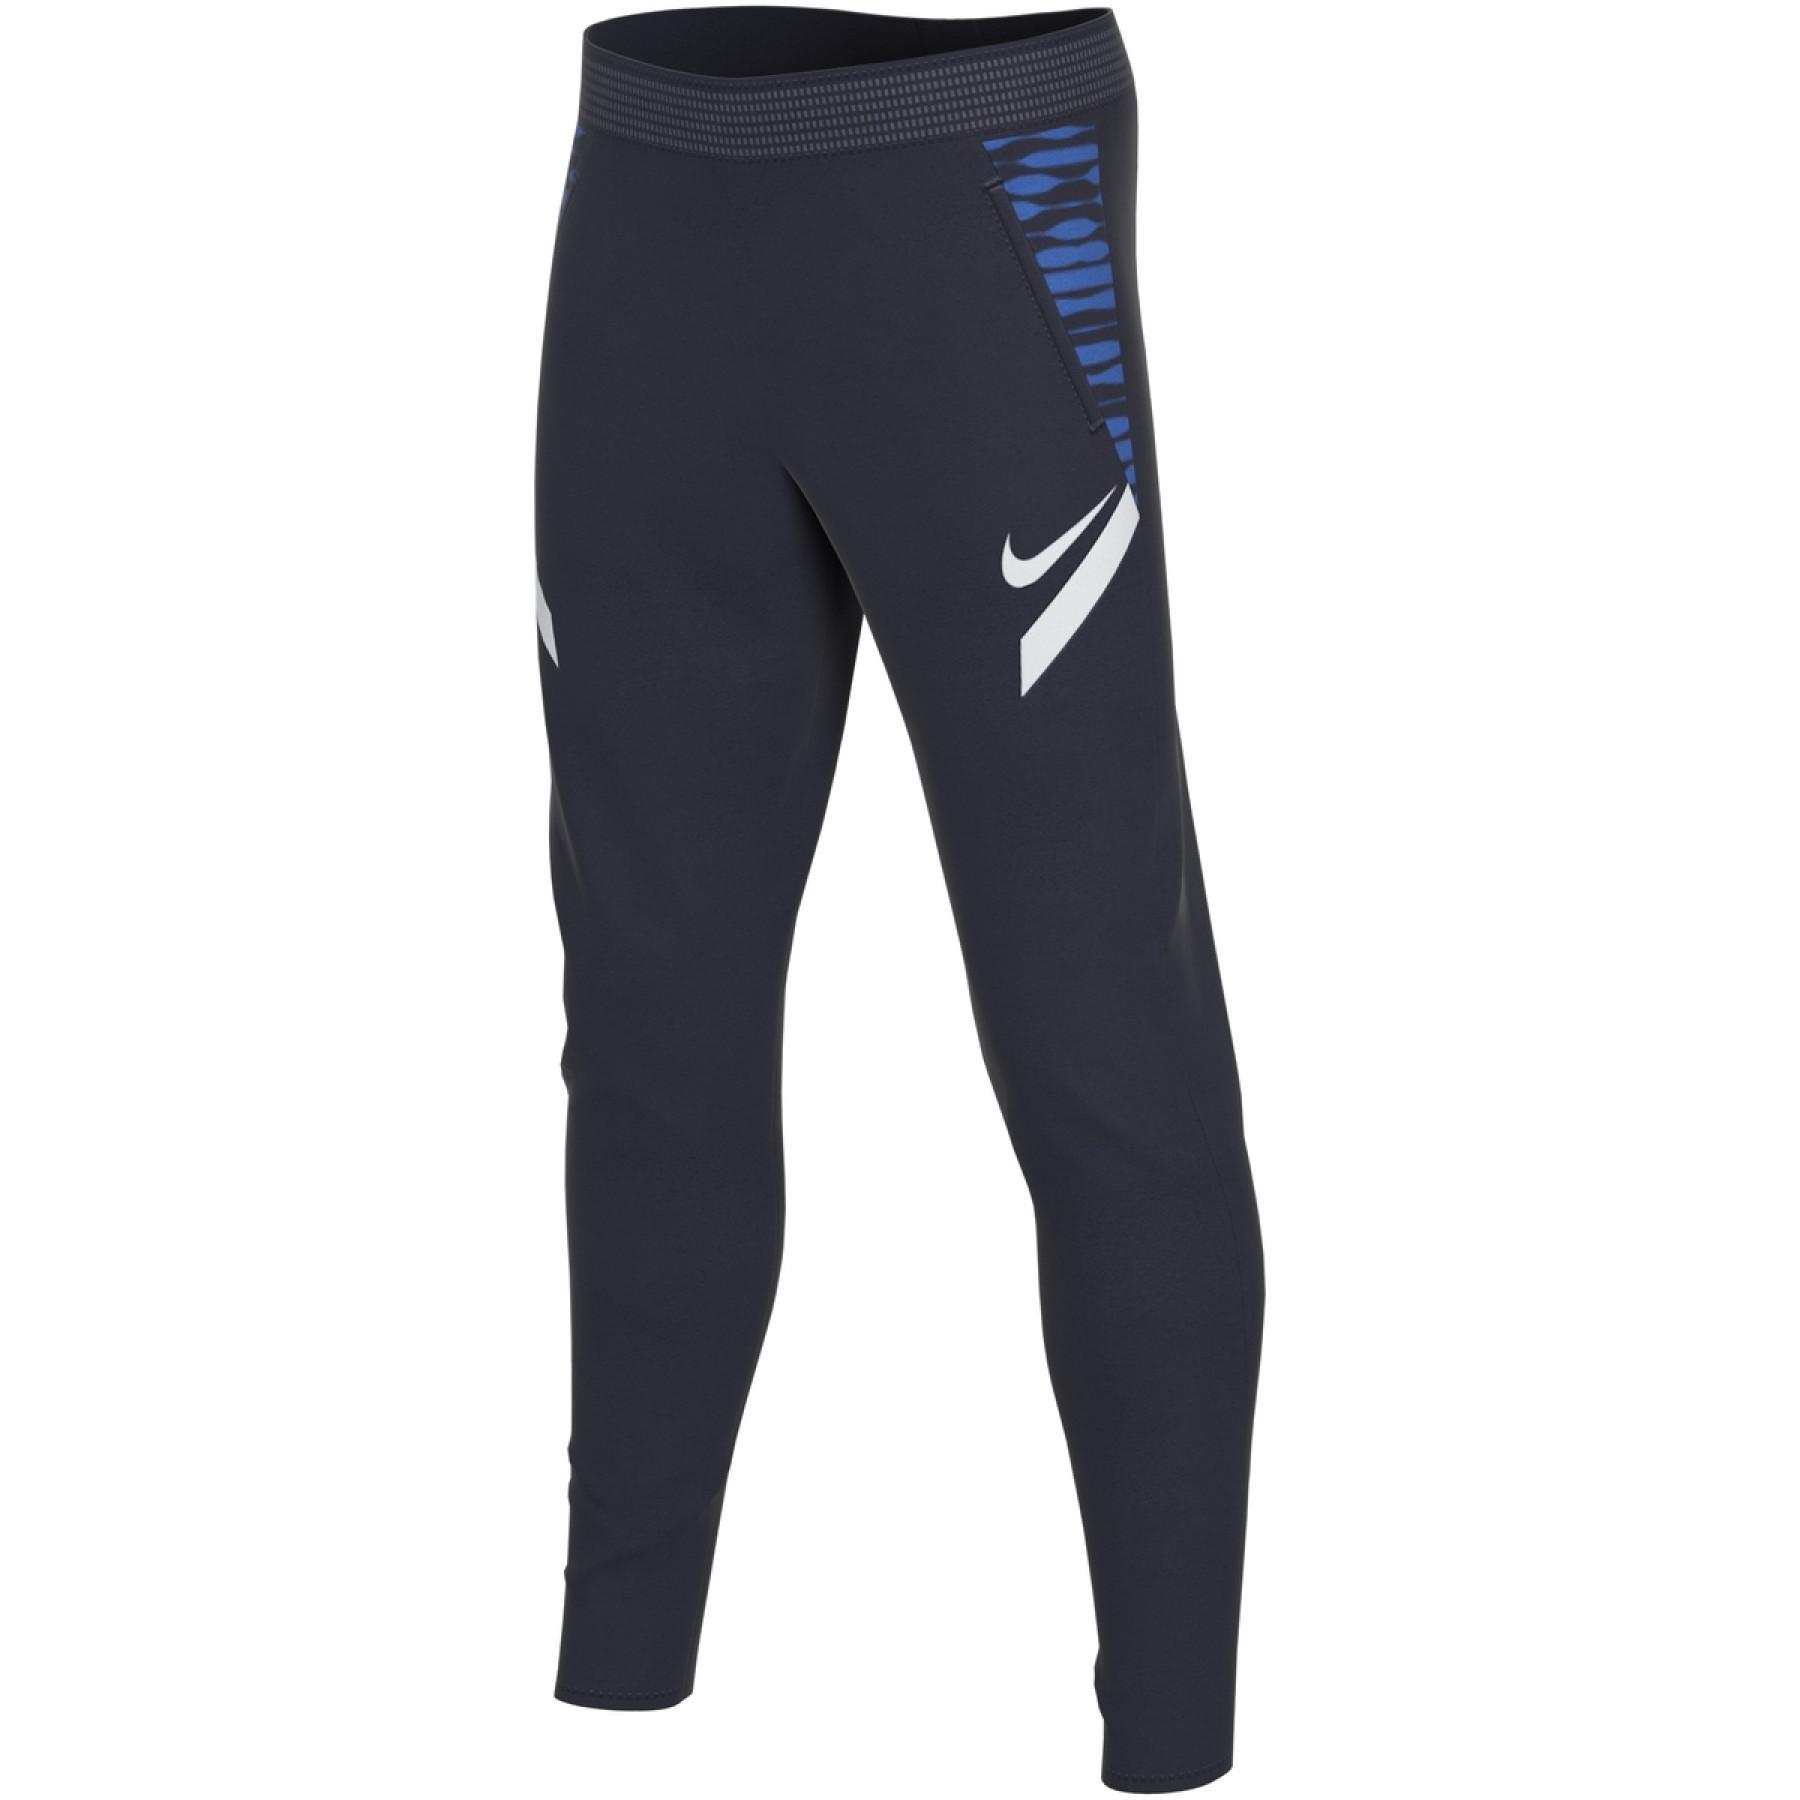 Children's trousers Nike Dynamic Fit StrikeE21